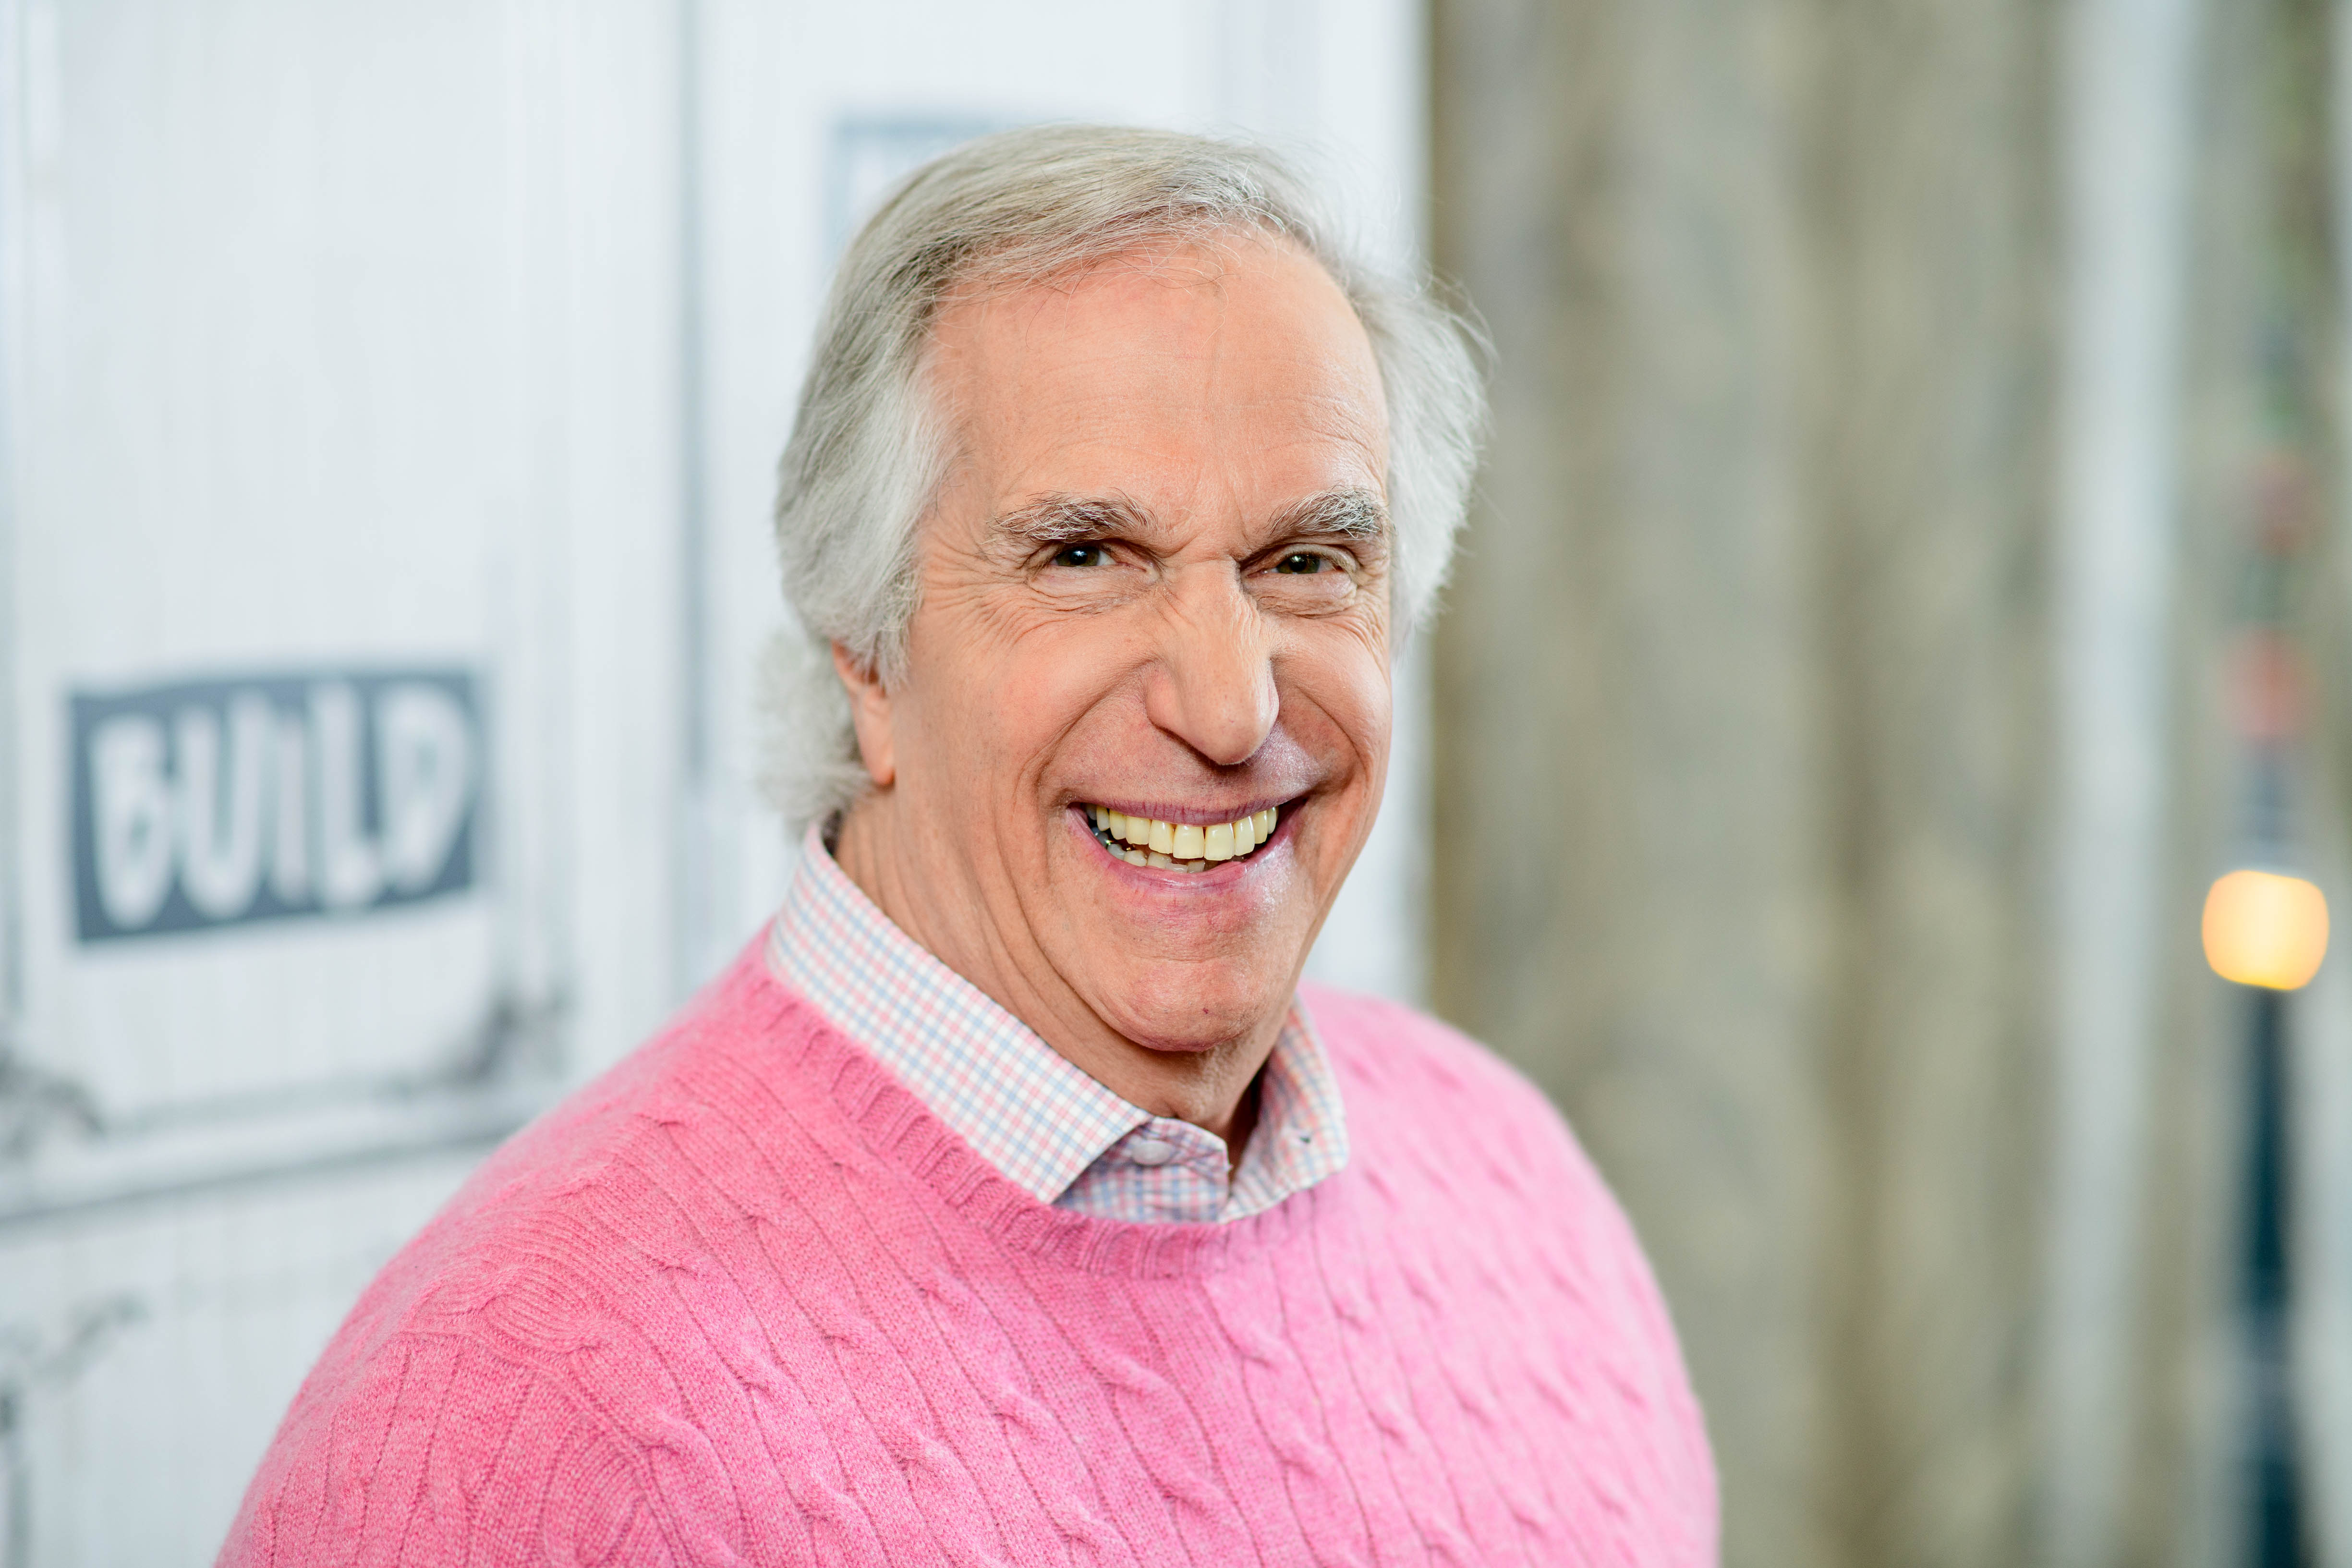 Henry Winkler discusses "Barry" with the Build Series at Build Studio on April 25, 2018 in New York City | Source: Getty Images